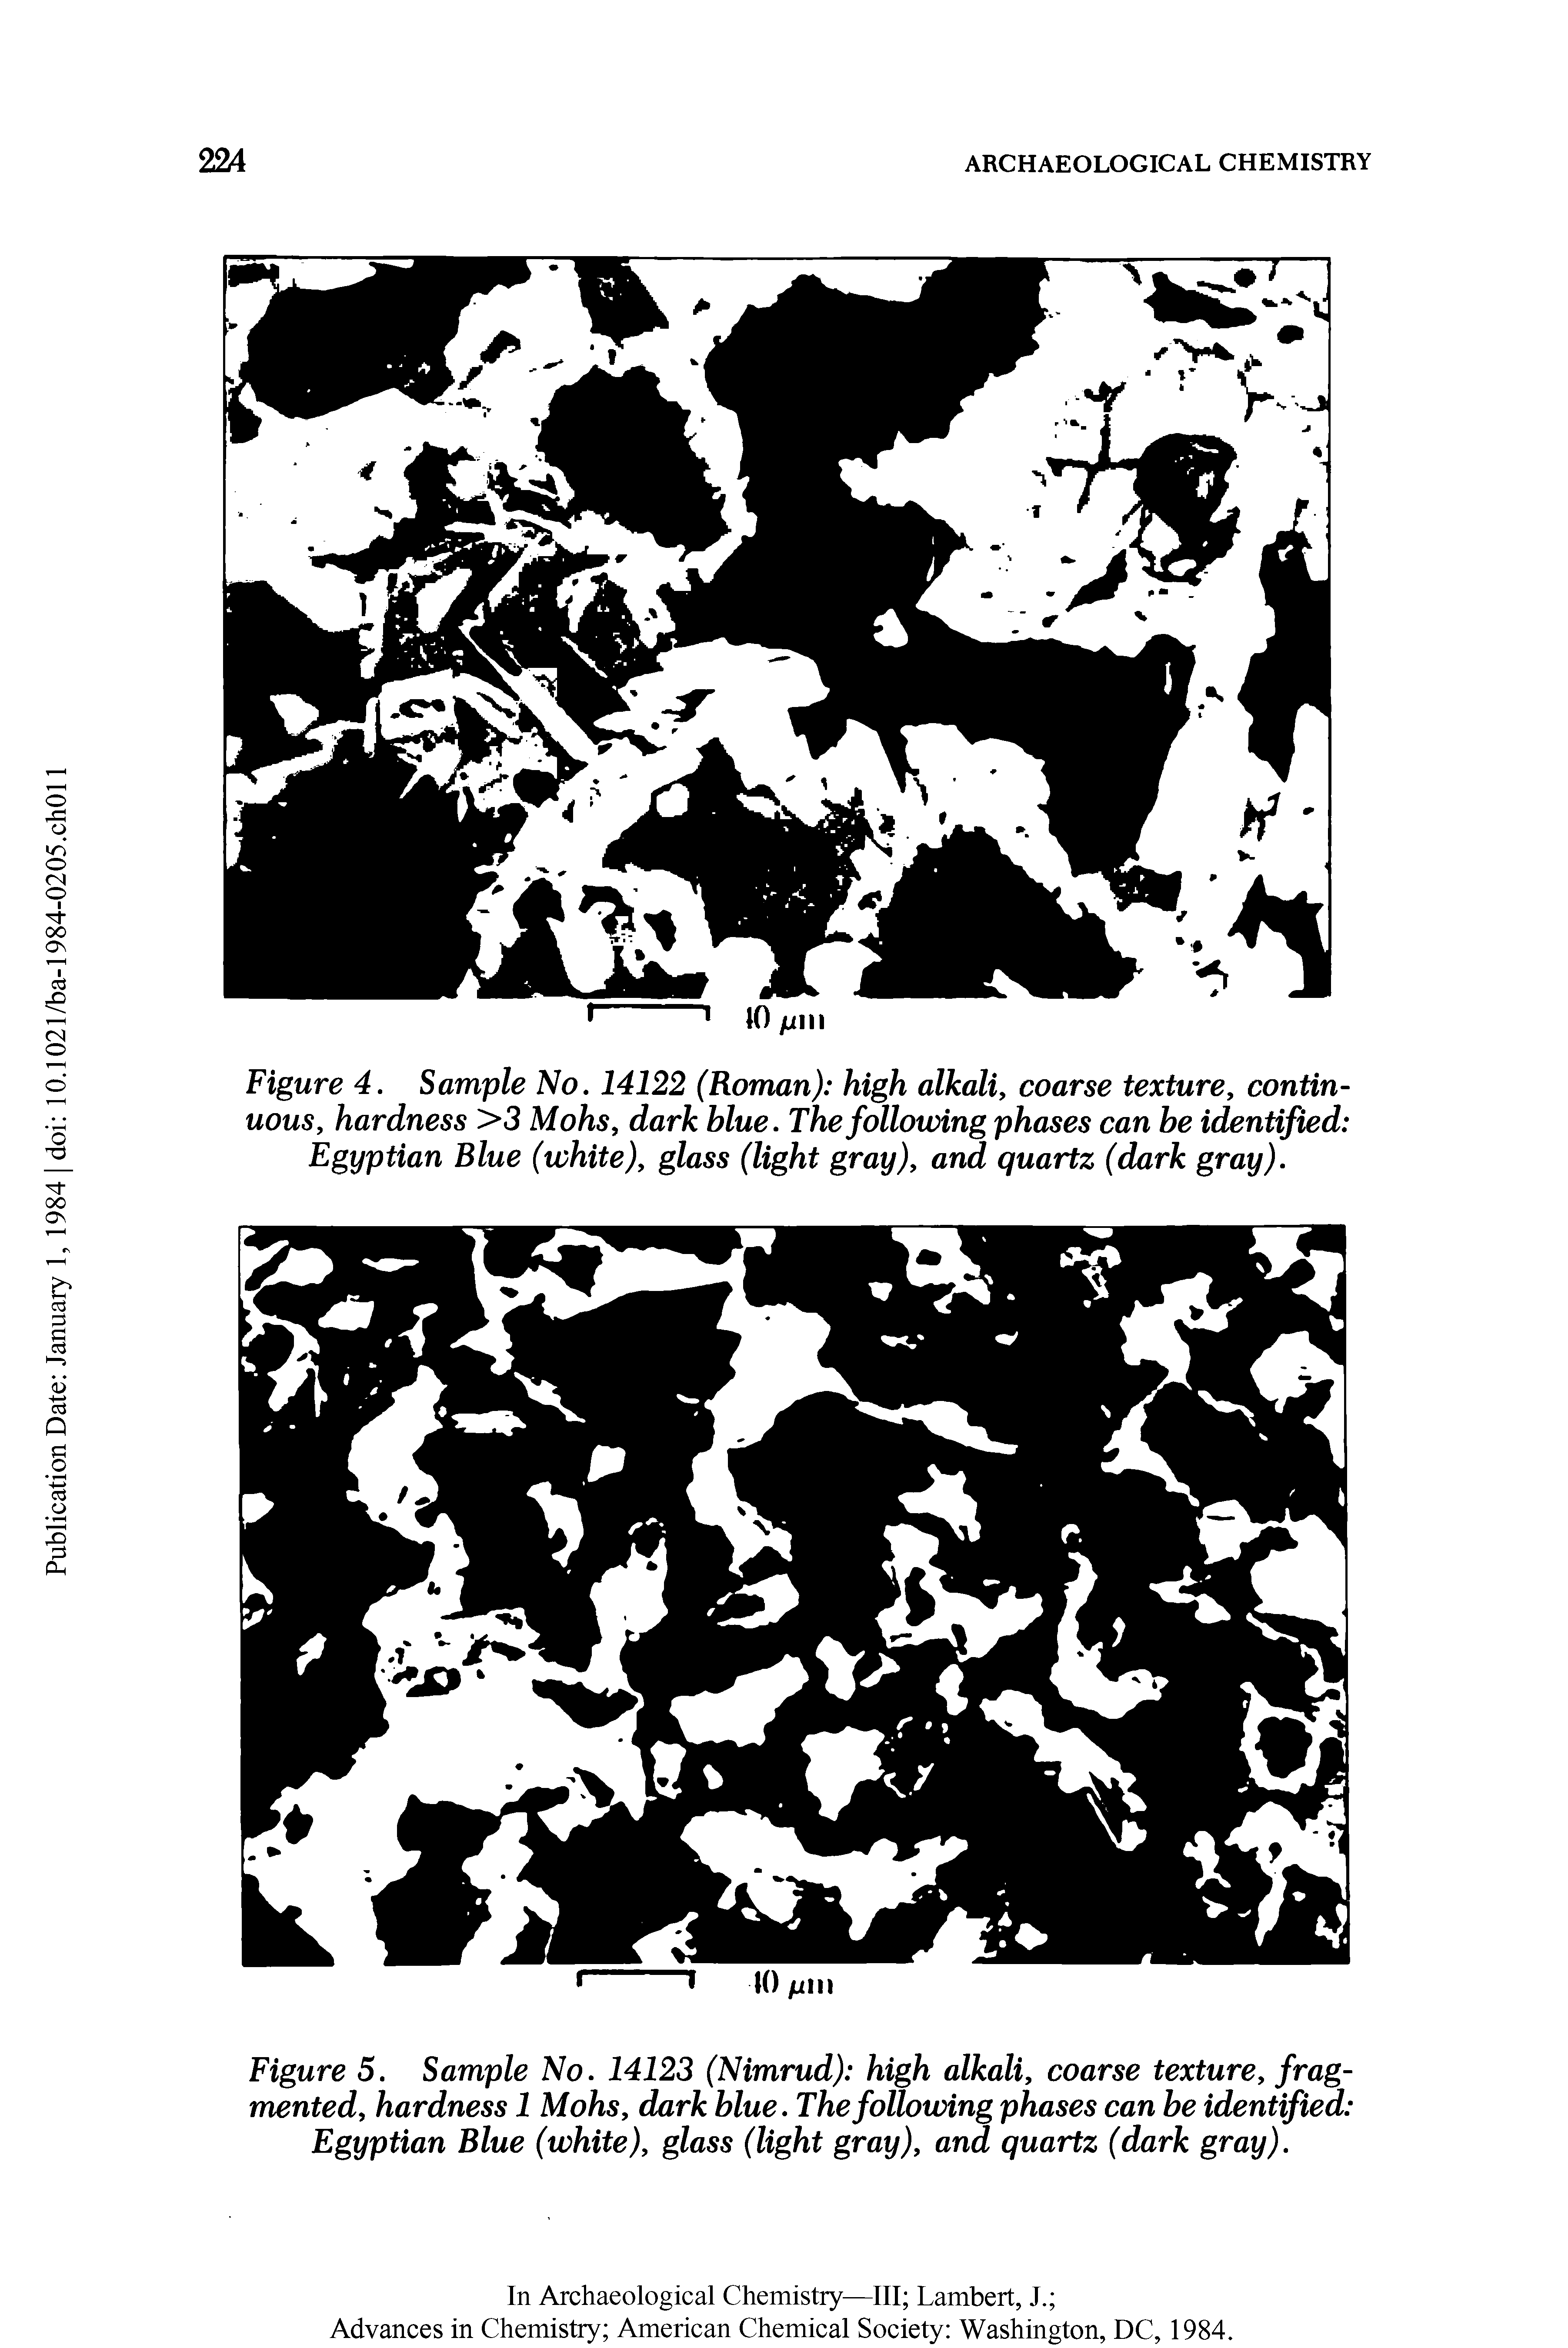 Figure 4. Sample No. 14122 (Roman) high alkali, coarse texture, continuous, hardness >3 Mohs, dark blue. Thefollotcing phases can be identified Egyptian Blue (white), glass (light gray), and quartz (dark gray).